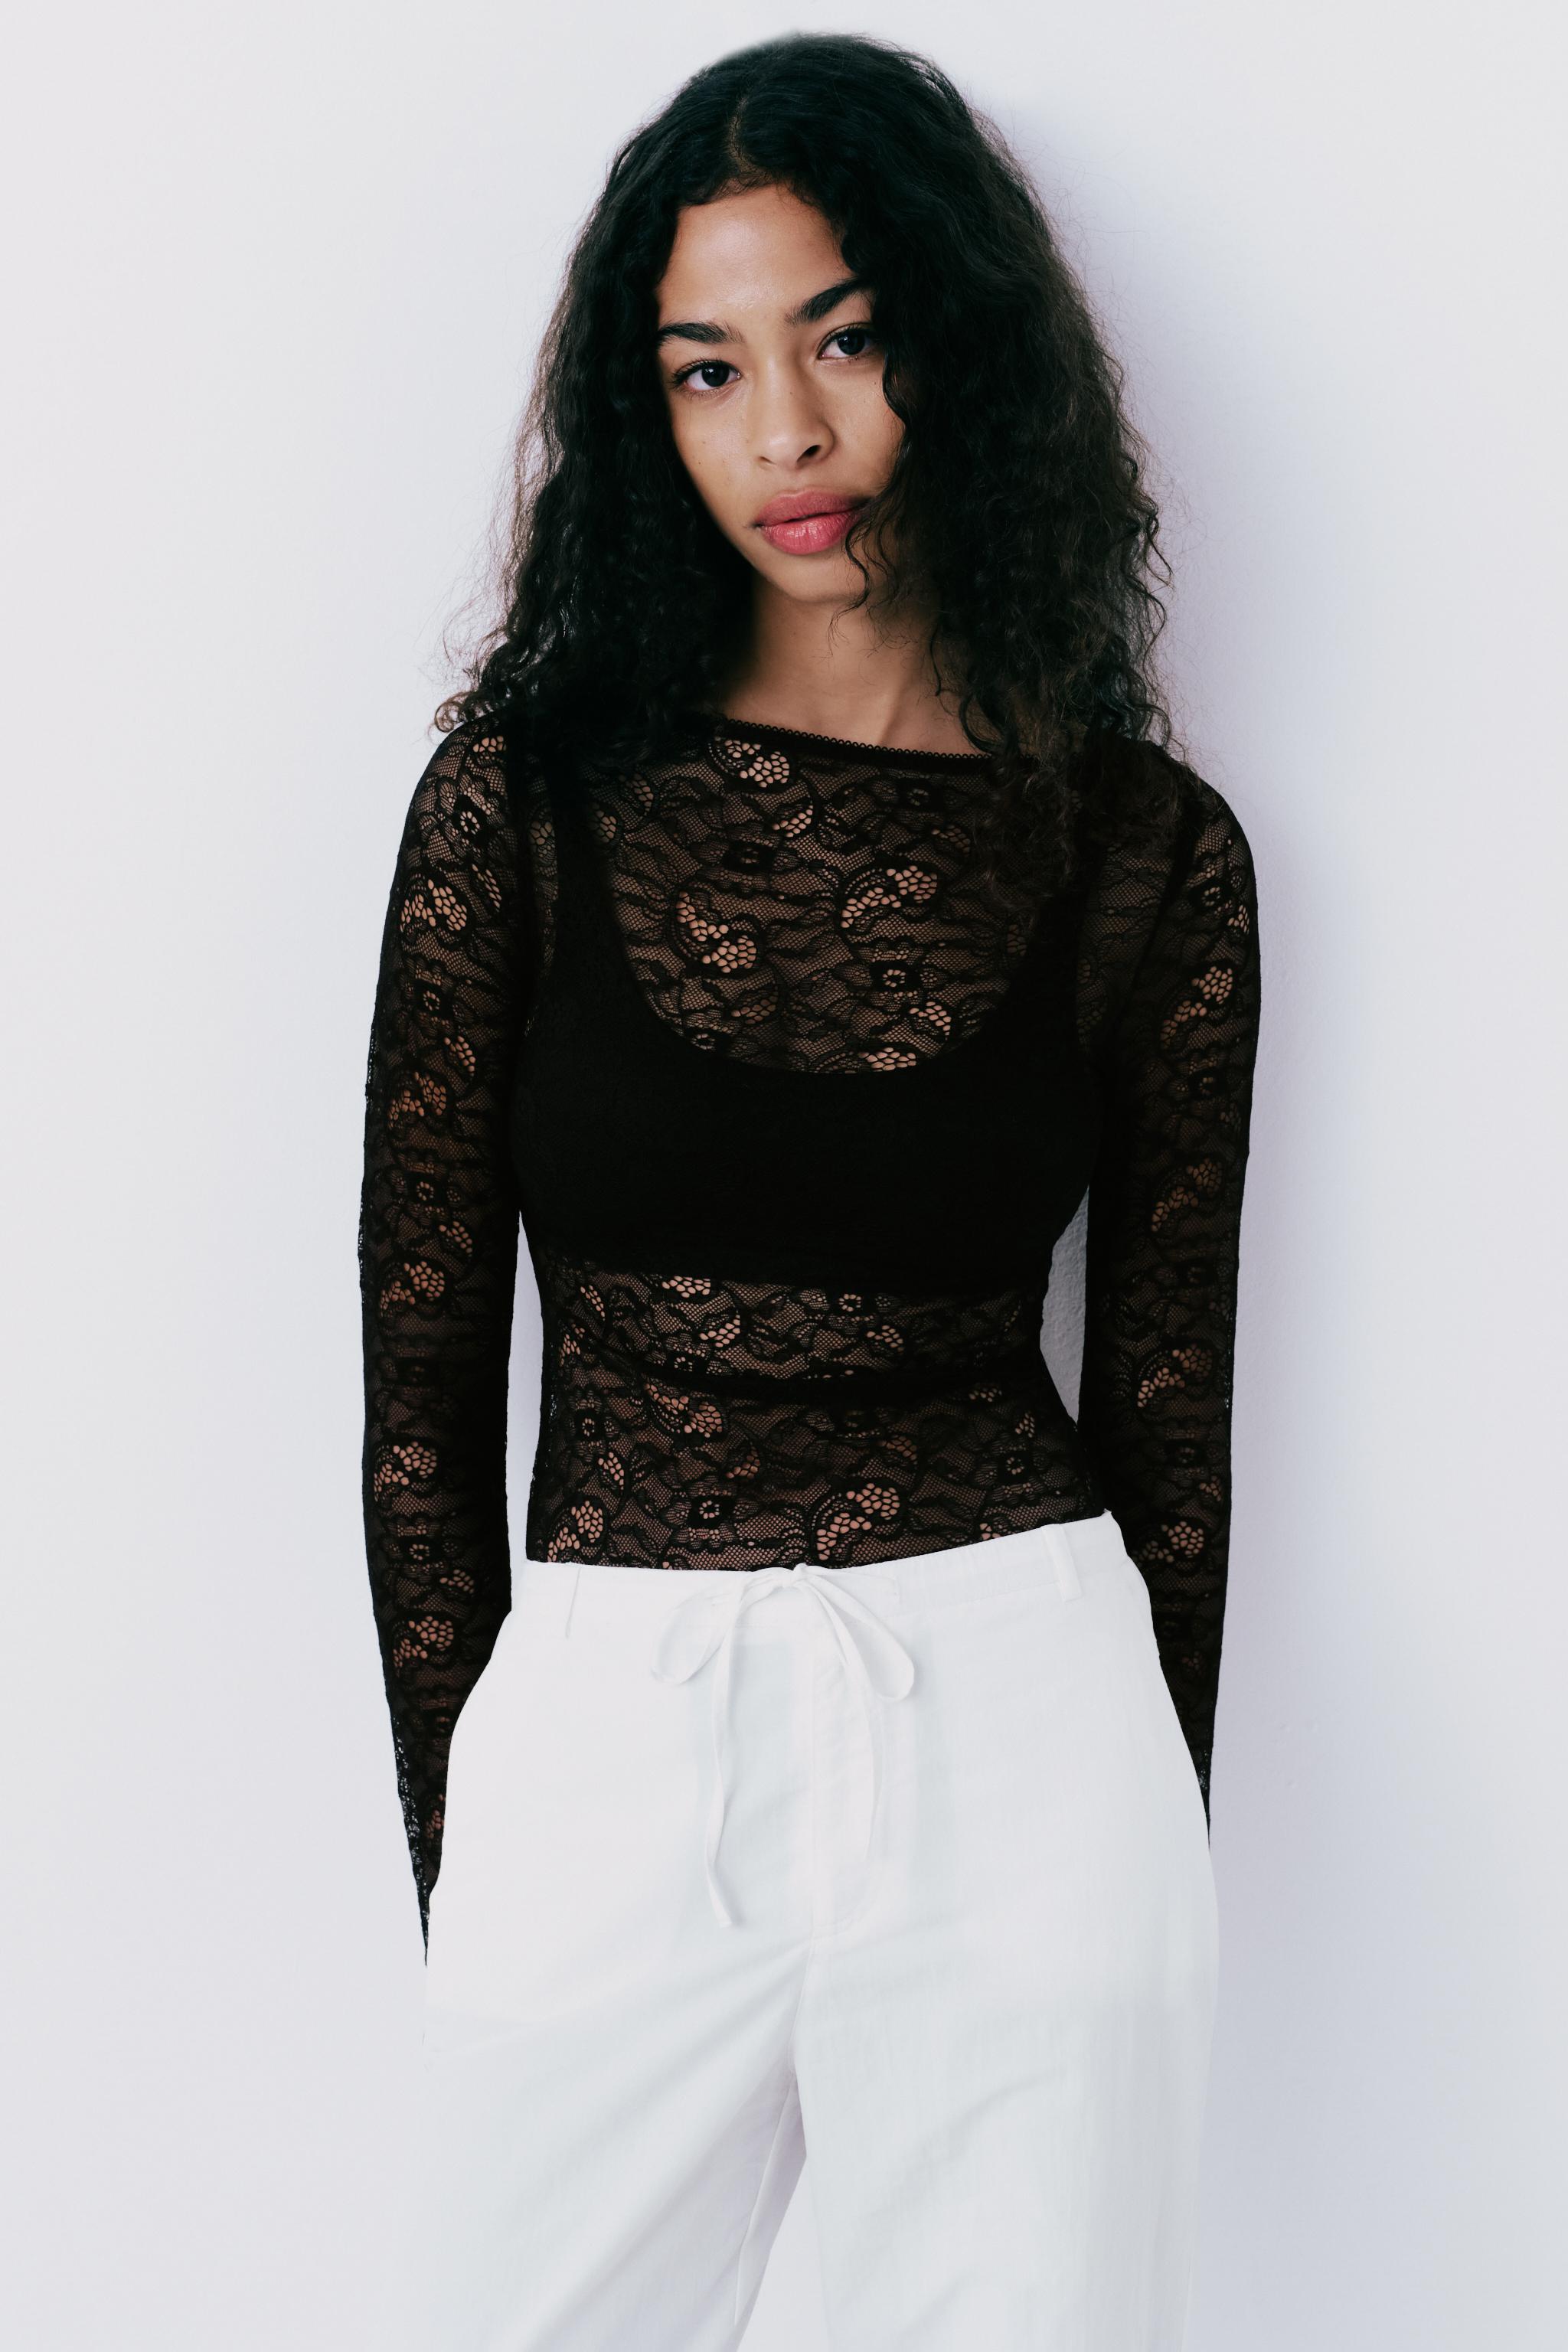 Lace Bodysuits, Black, White, Red & Long Sleeve